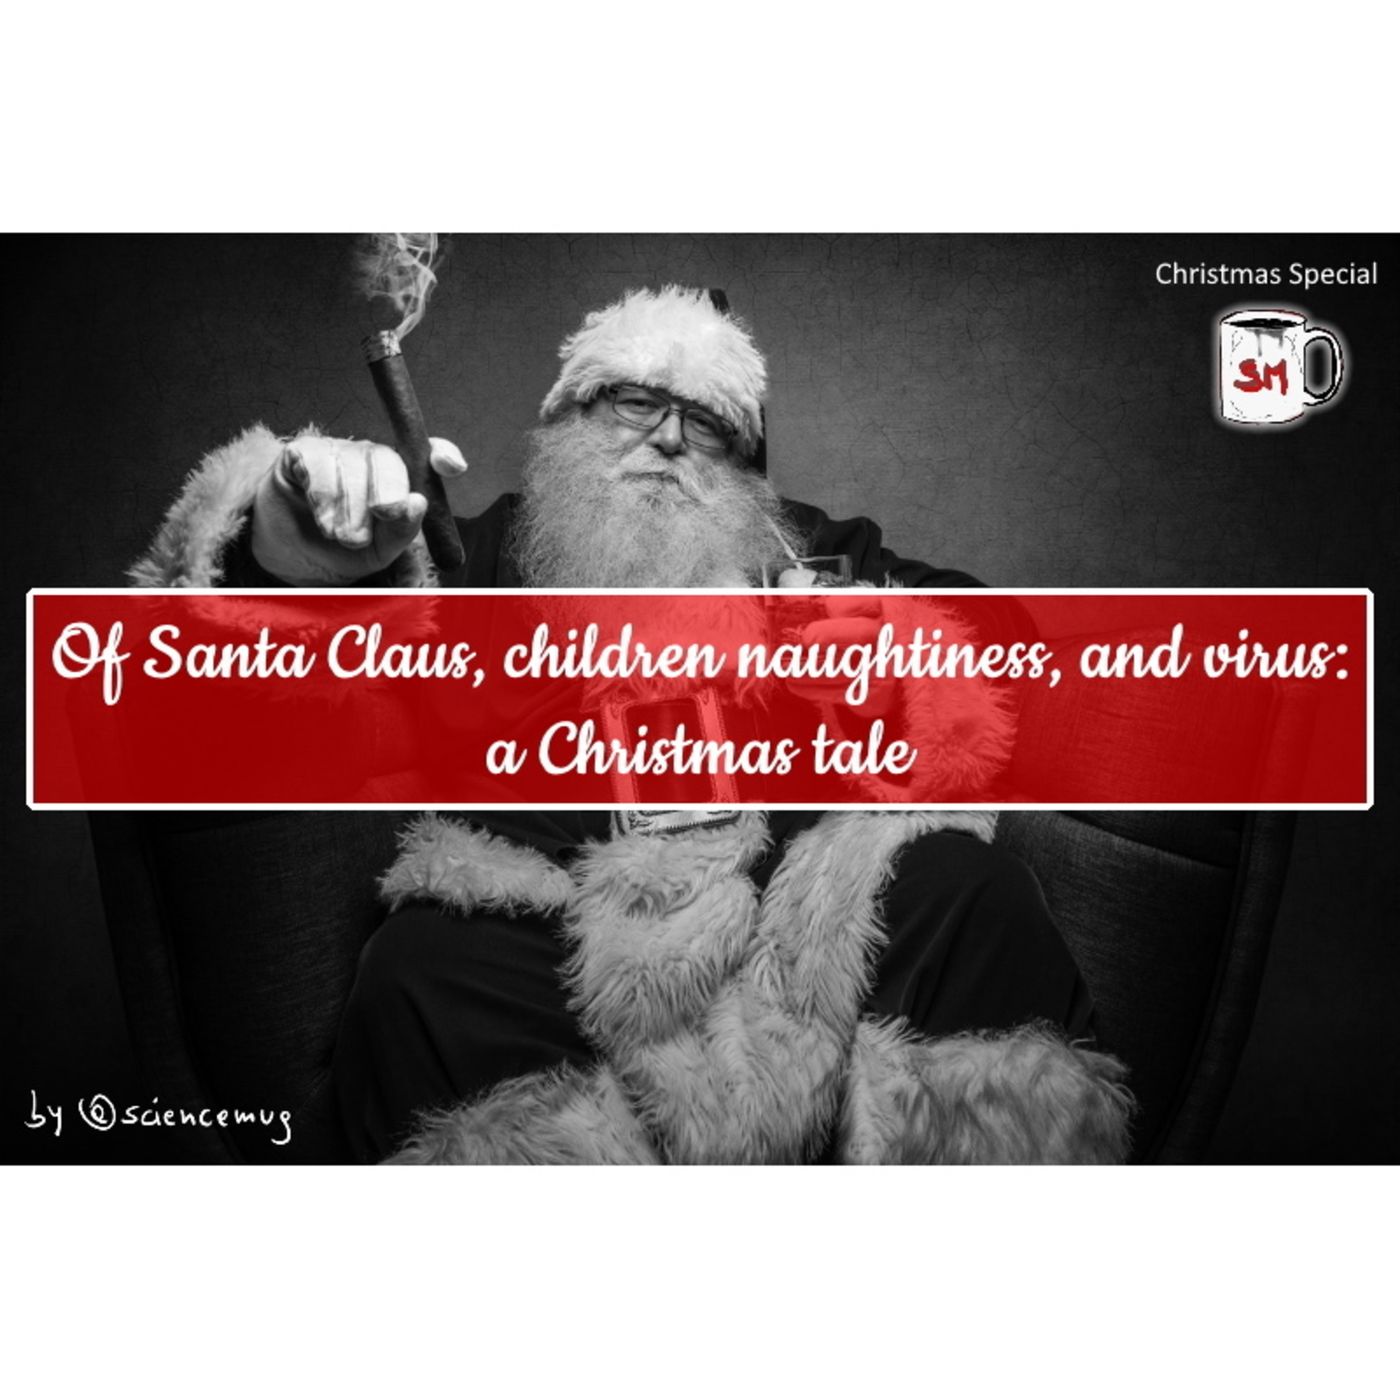 Of Santa Claus, children naughtiness, and virus: a Christmas tale